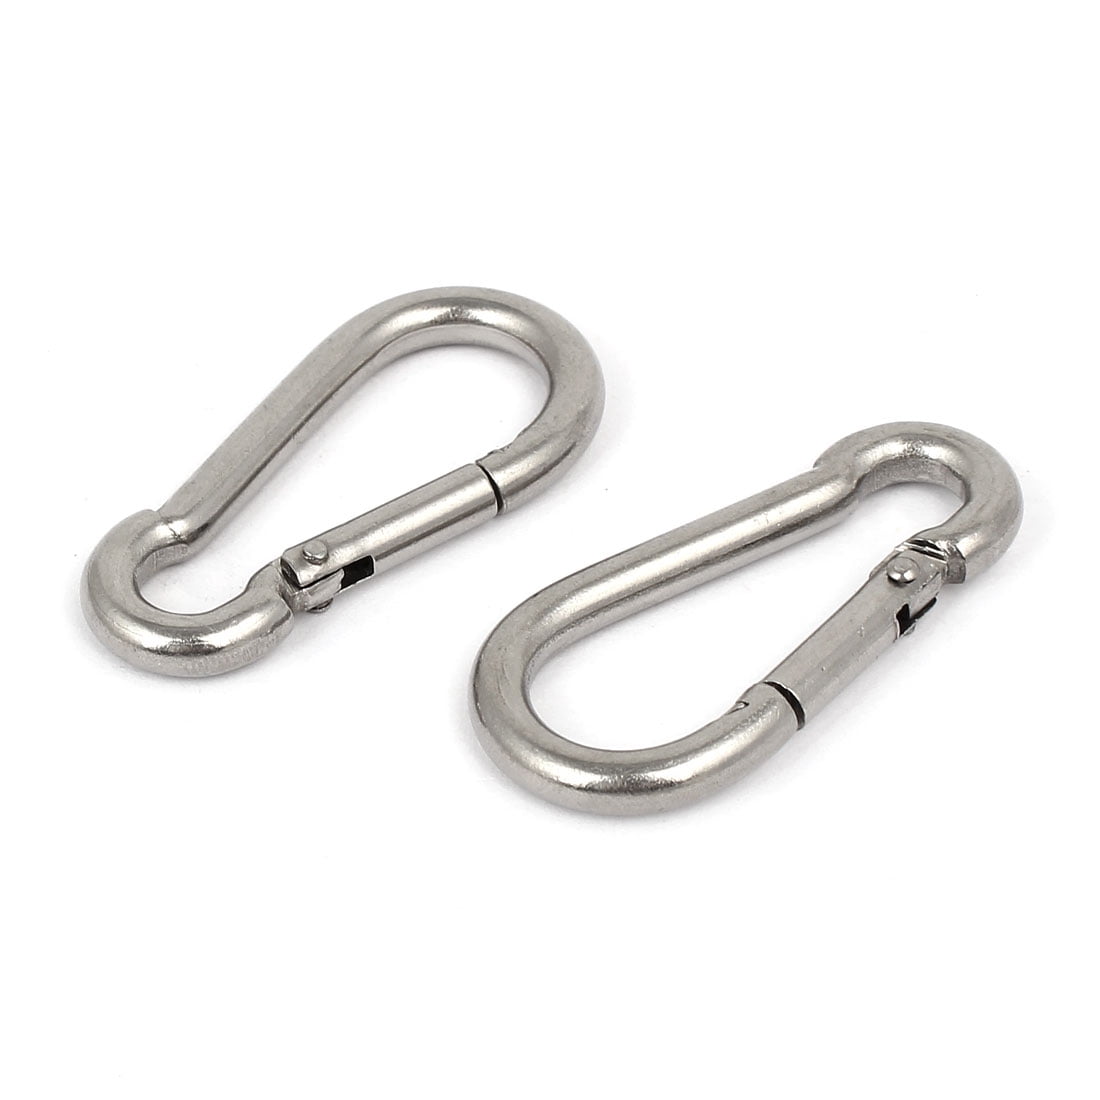 2-10pcs Stainless Steel Carabiner Clip Snap Hook Spring Loaded Carabina Carbine 